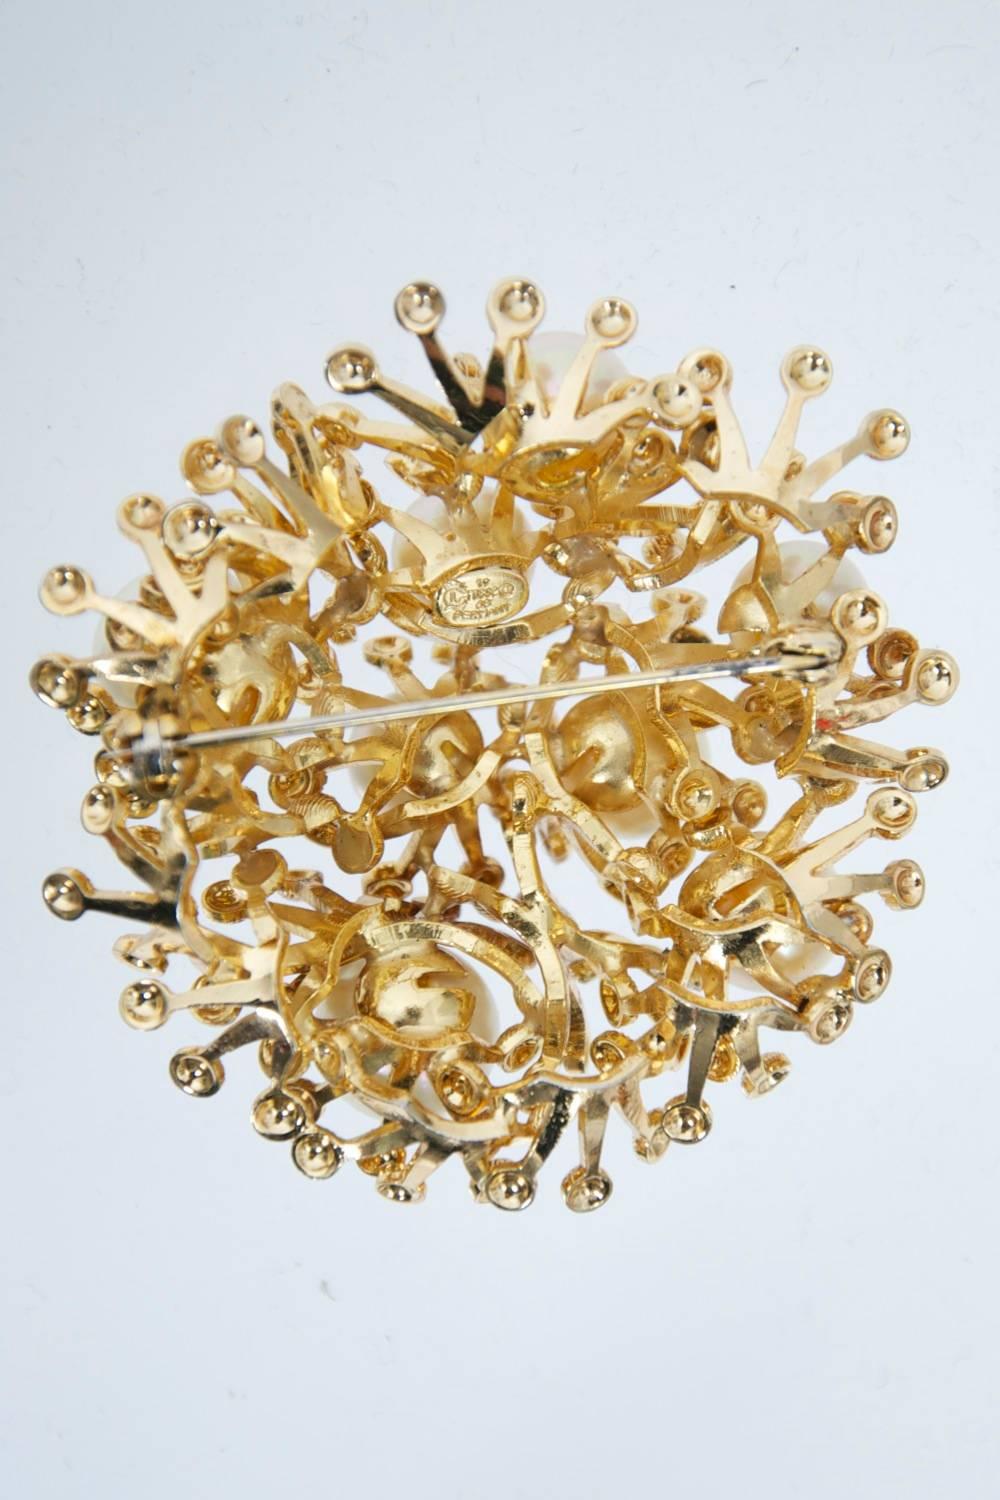 Grosse brooch from 1968 composed of an open network of crownlike elements, each point terminating in a textured drop, and each circular grouping centering a pearl of varying dimensions. Well crafted, as expected of this highly respected German firm,